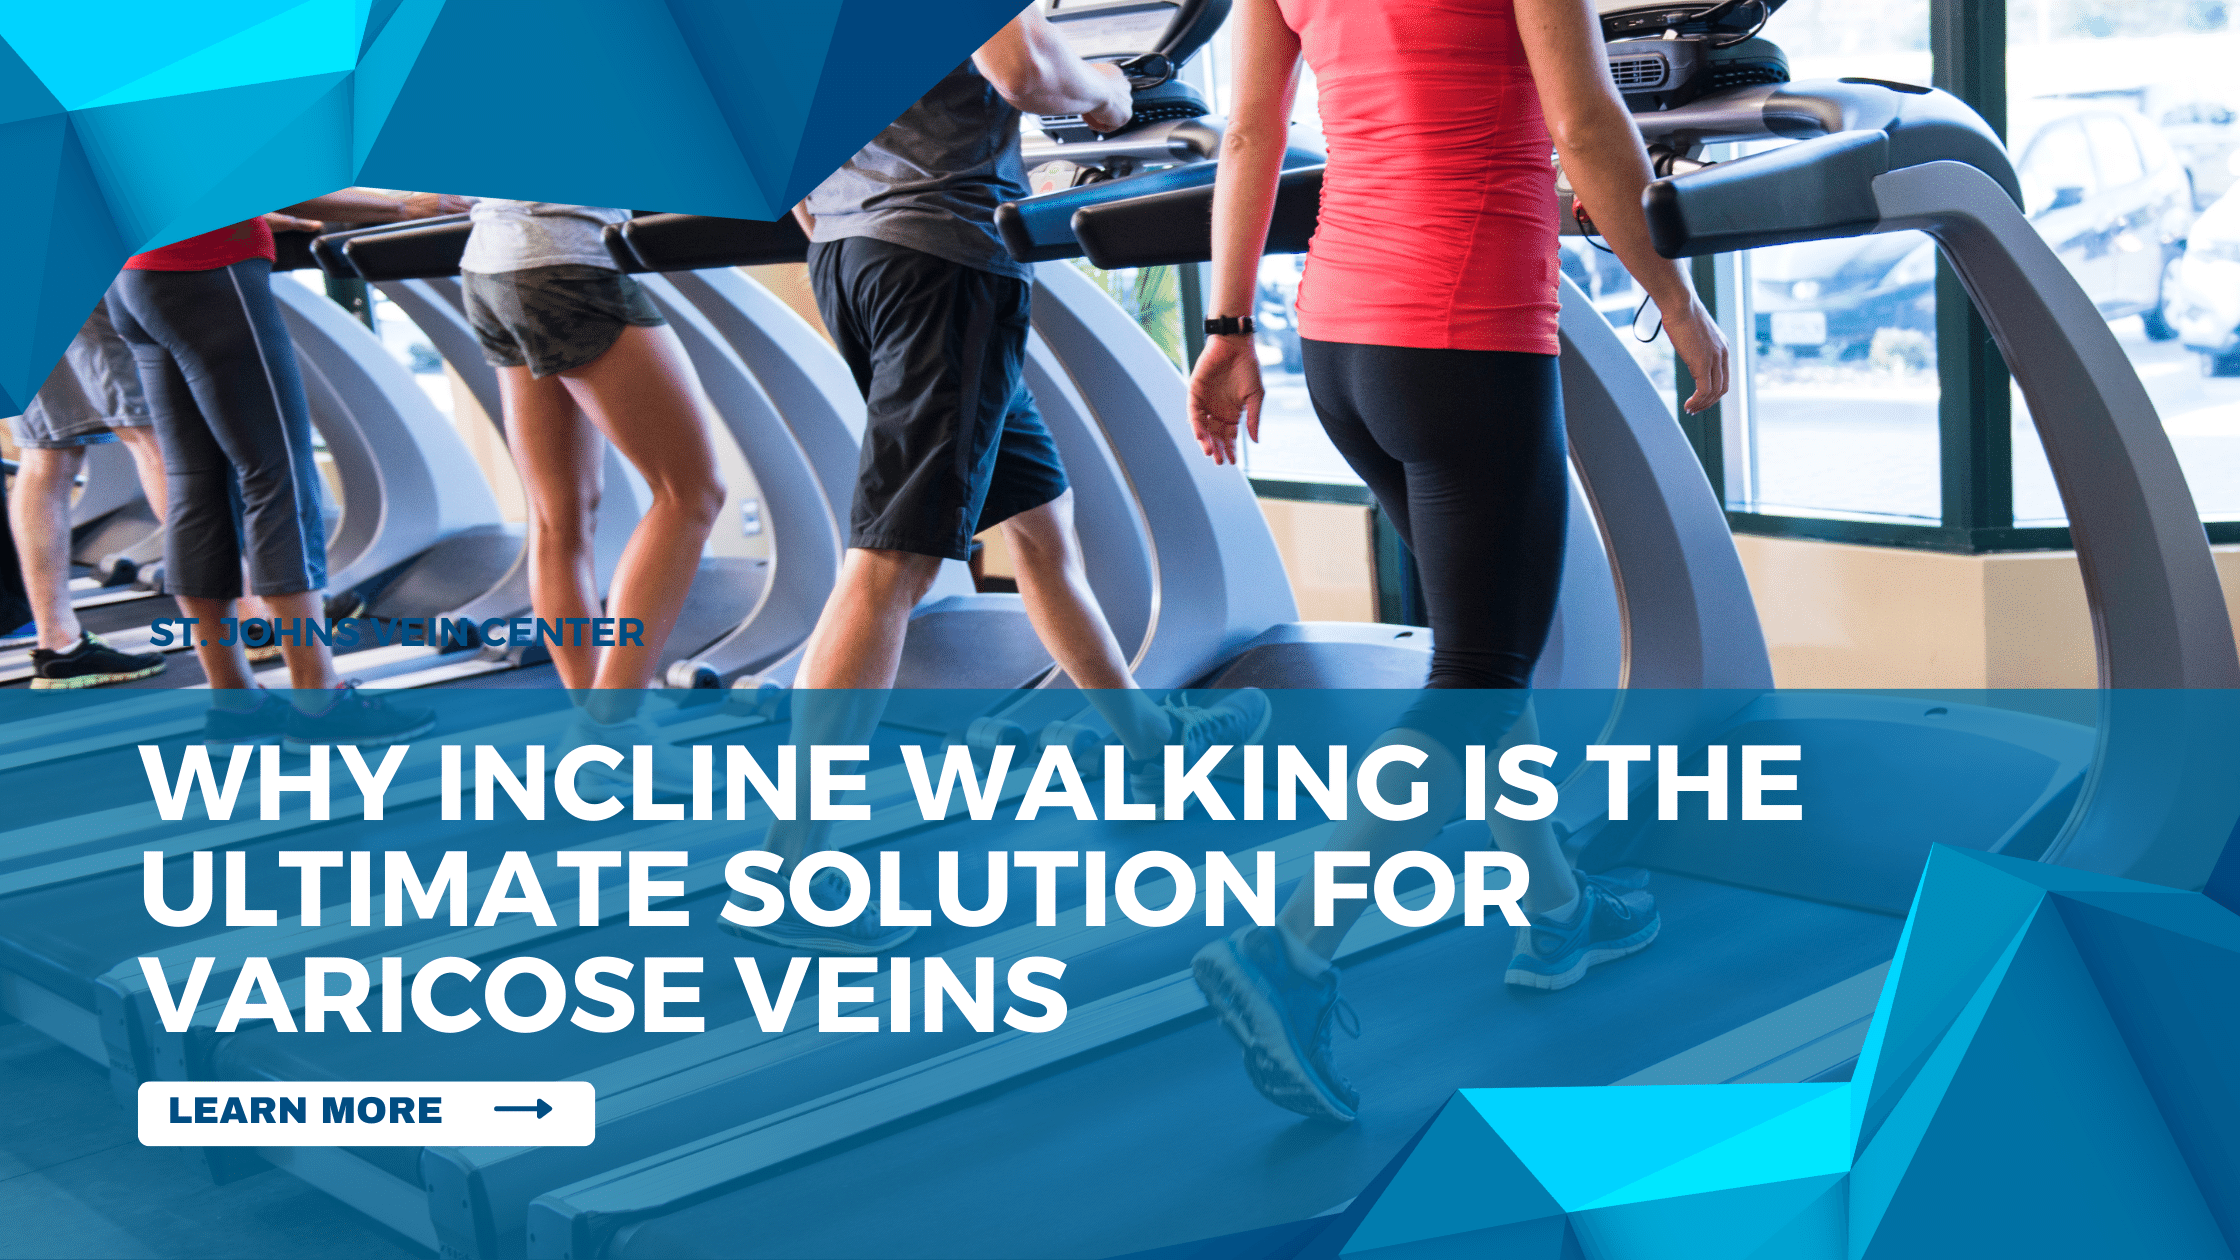 Why Incline Walking is the Ultimate Solution for Varicose Veins